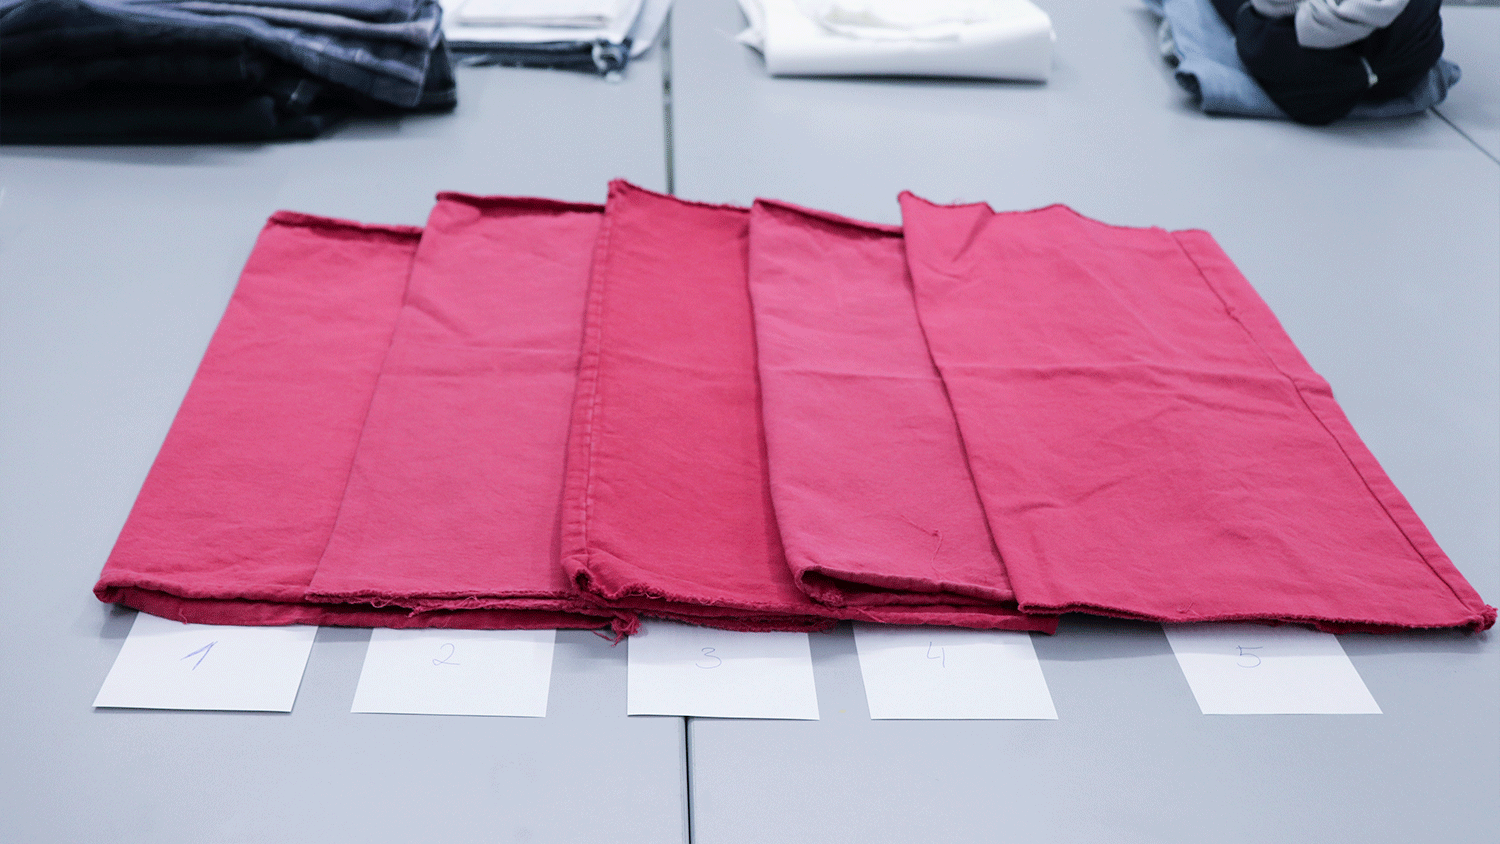 Red fabrics for practical experiments in the laboratory